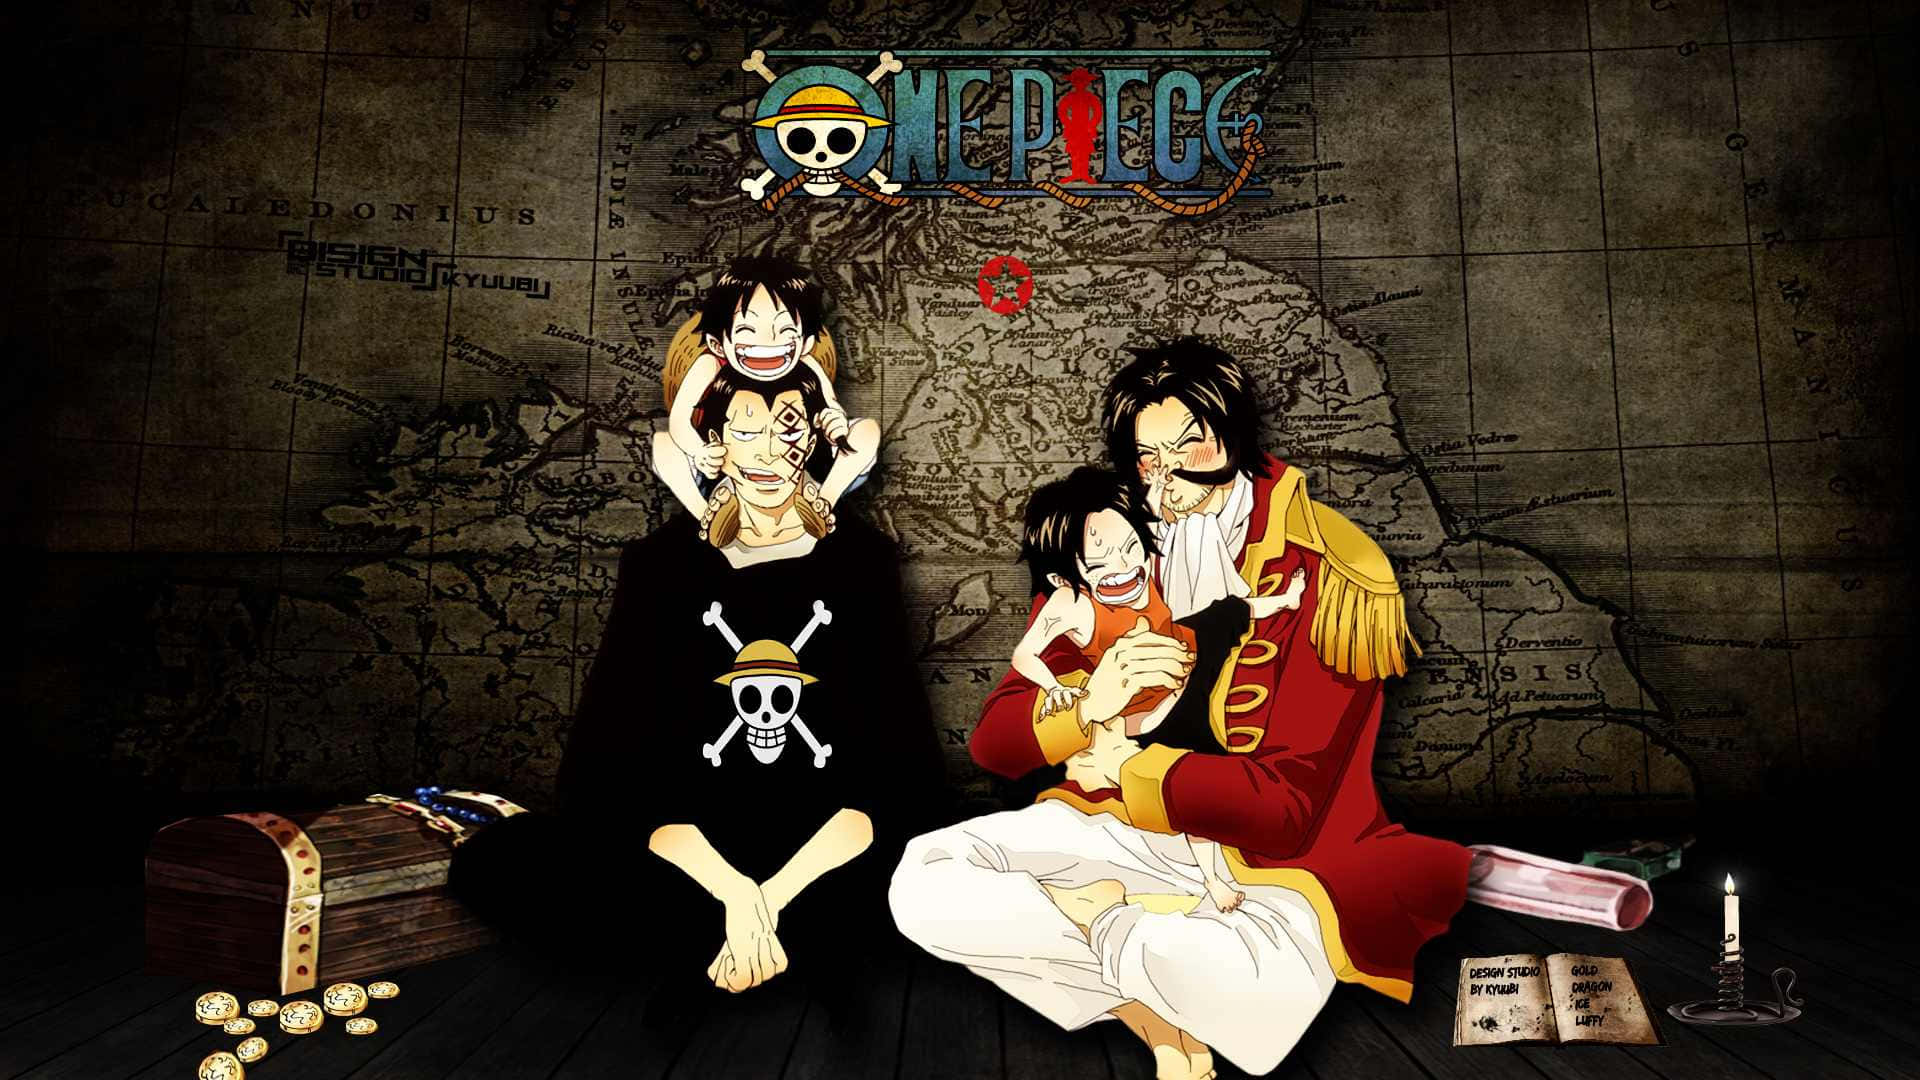 Check Out This Awesome Artwork Of Famous Pirate Luffy! Wallpaper